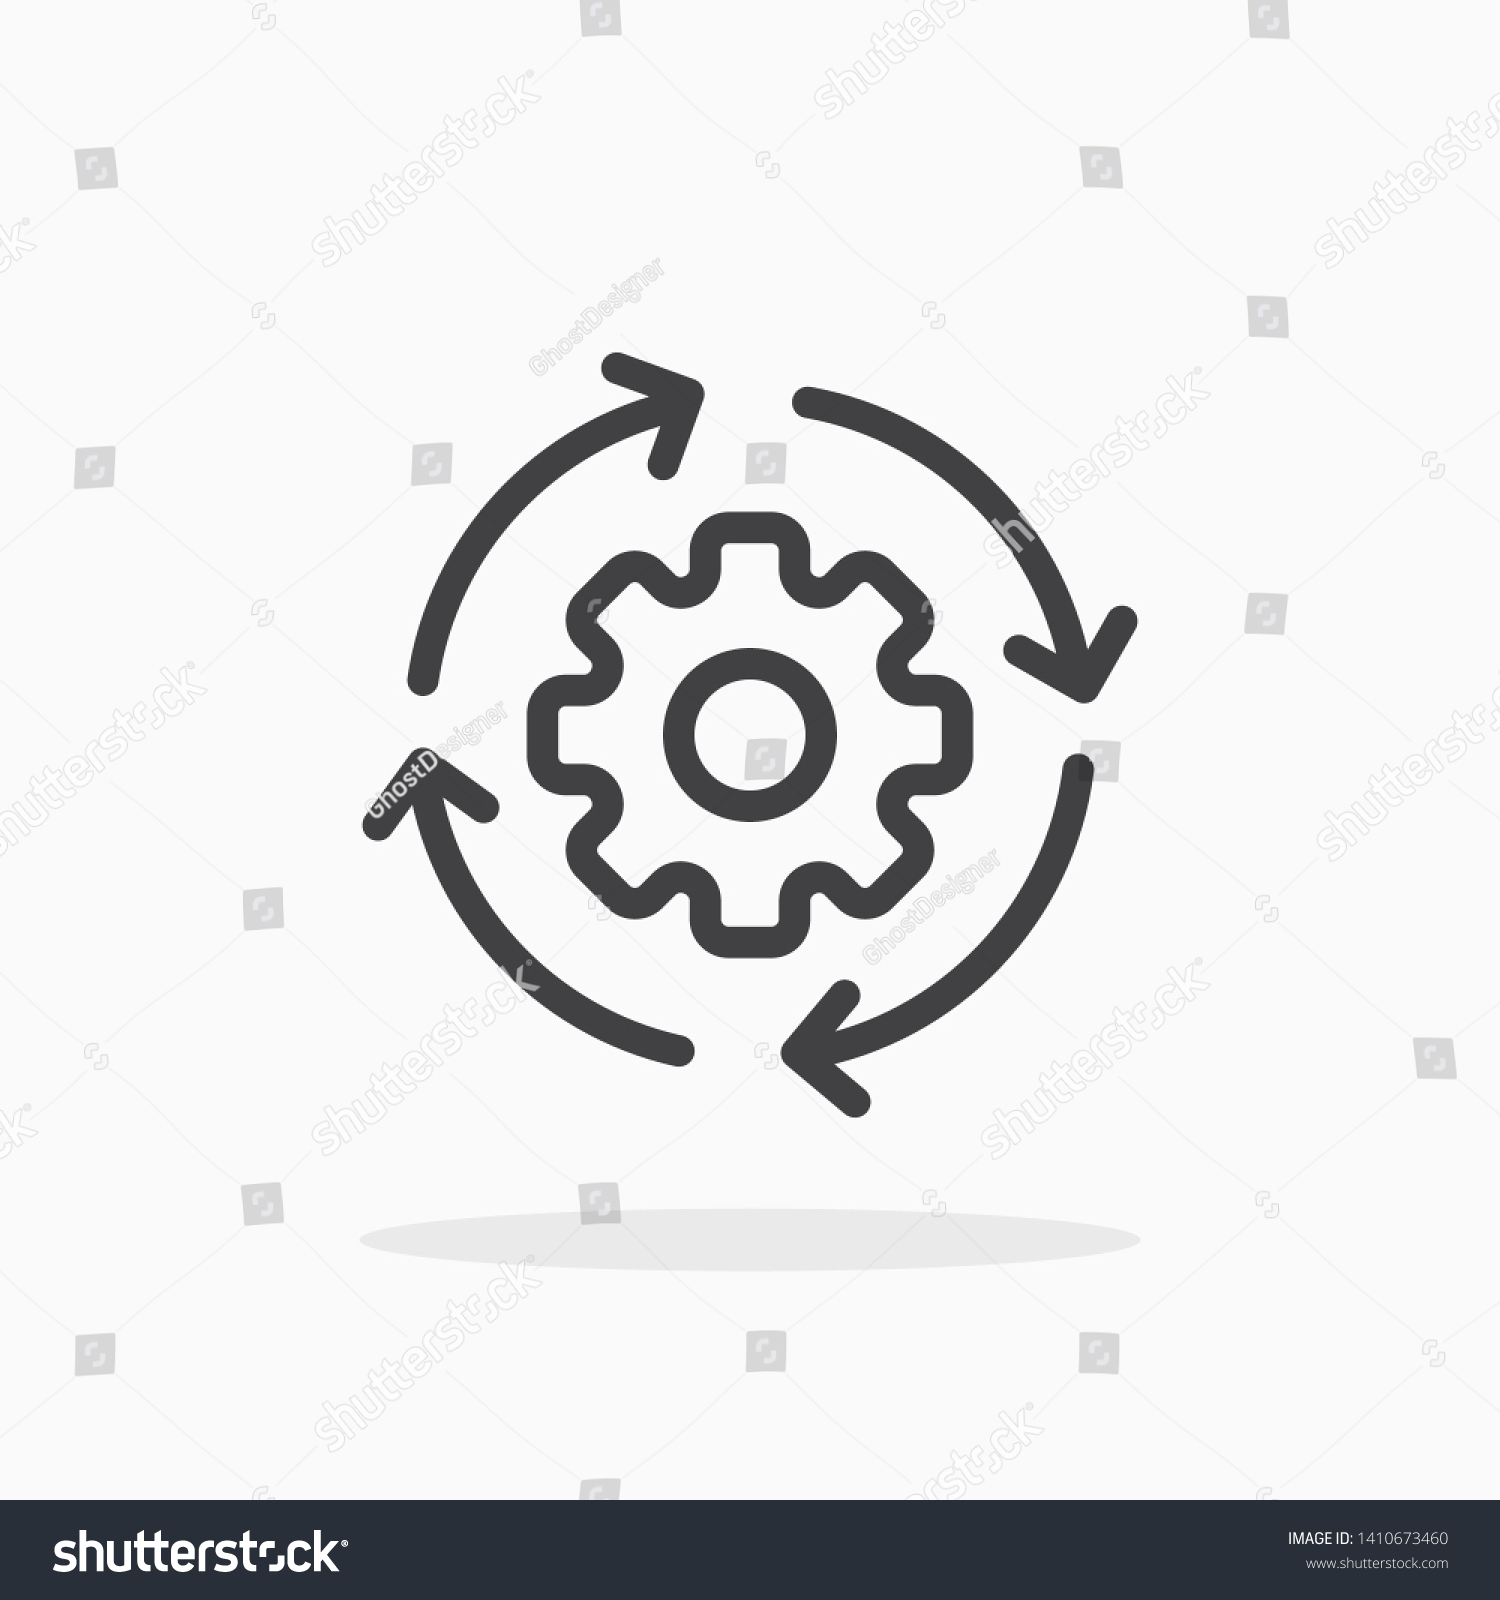 Workflow icon in line style. For your design, logo. Vector illustration. Editable Stroke. #1410673460